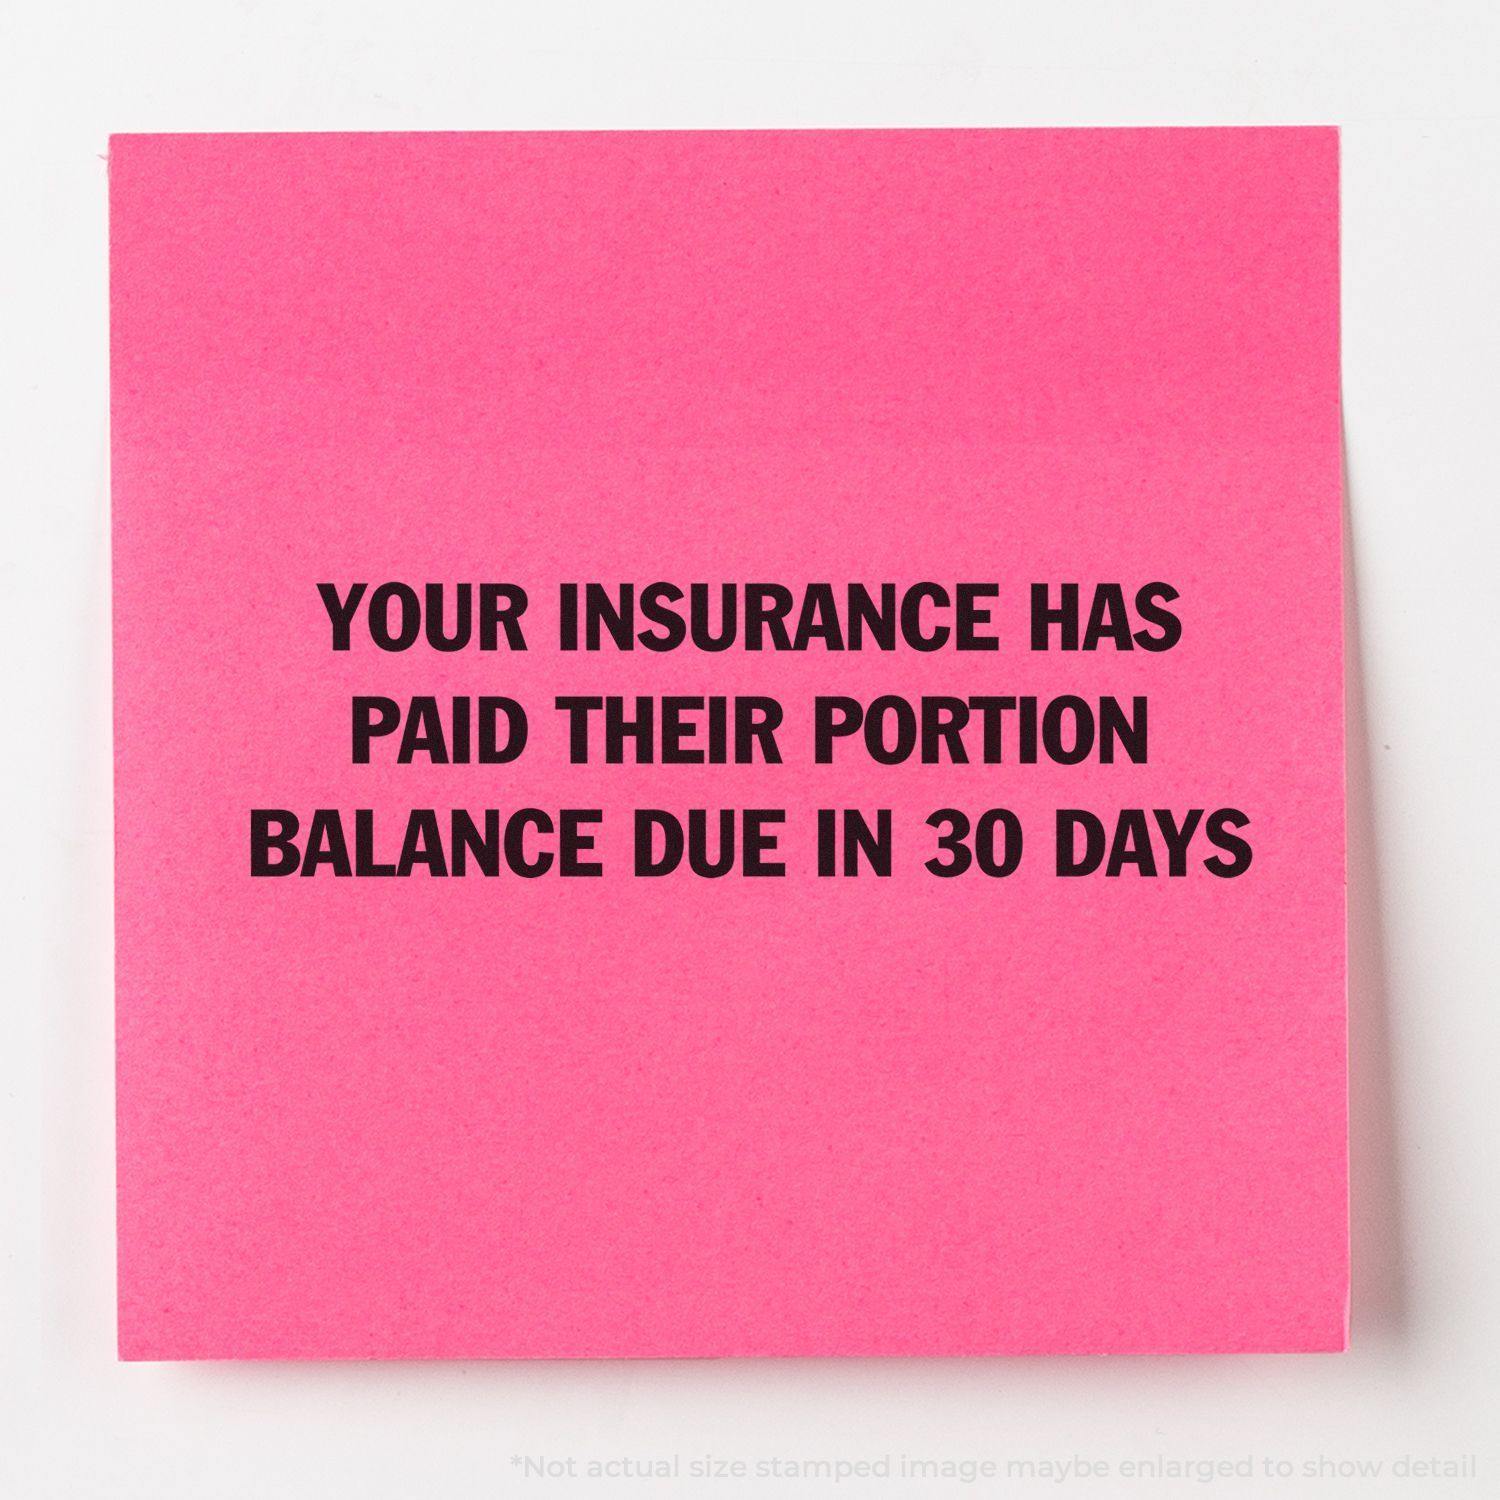 A self-inking stamp with a stamped image showing how the texts "YOUR INSURANCE HAS PAID THEIR PORTION" and "BALANCE DUE IN 30 DAYS" are displayed after stamping.